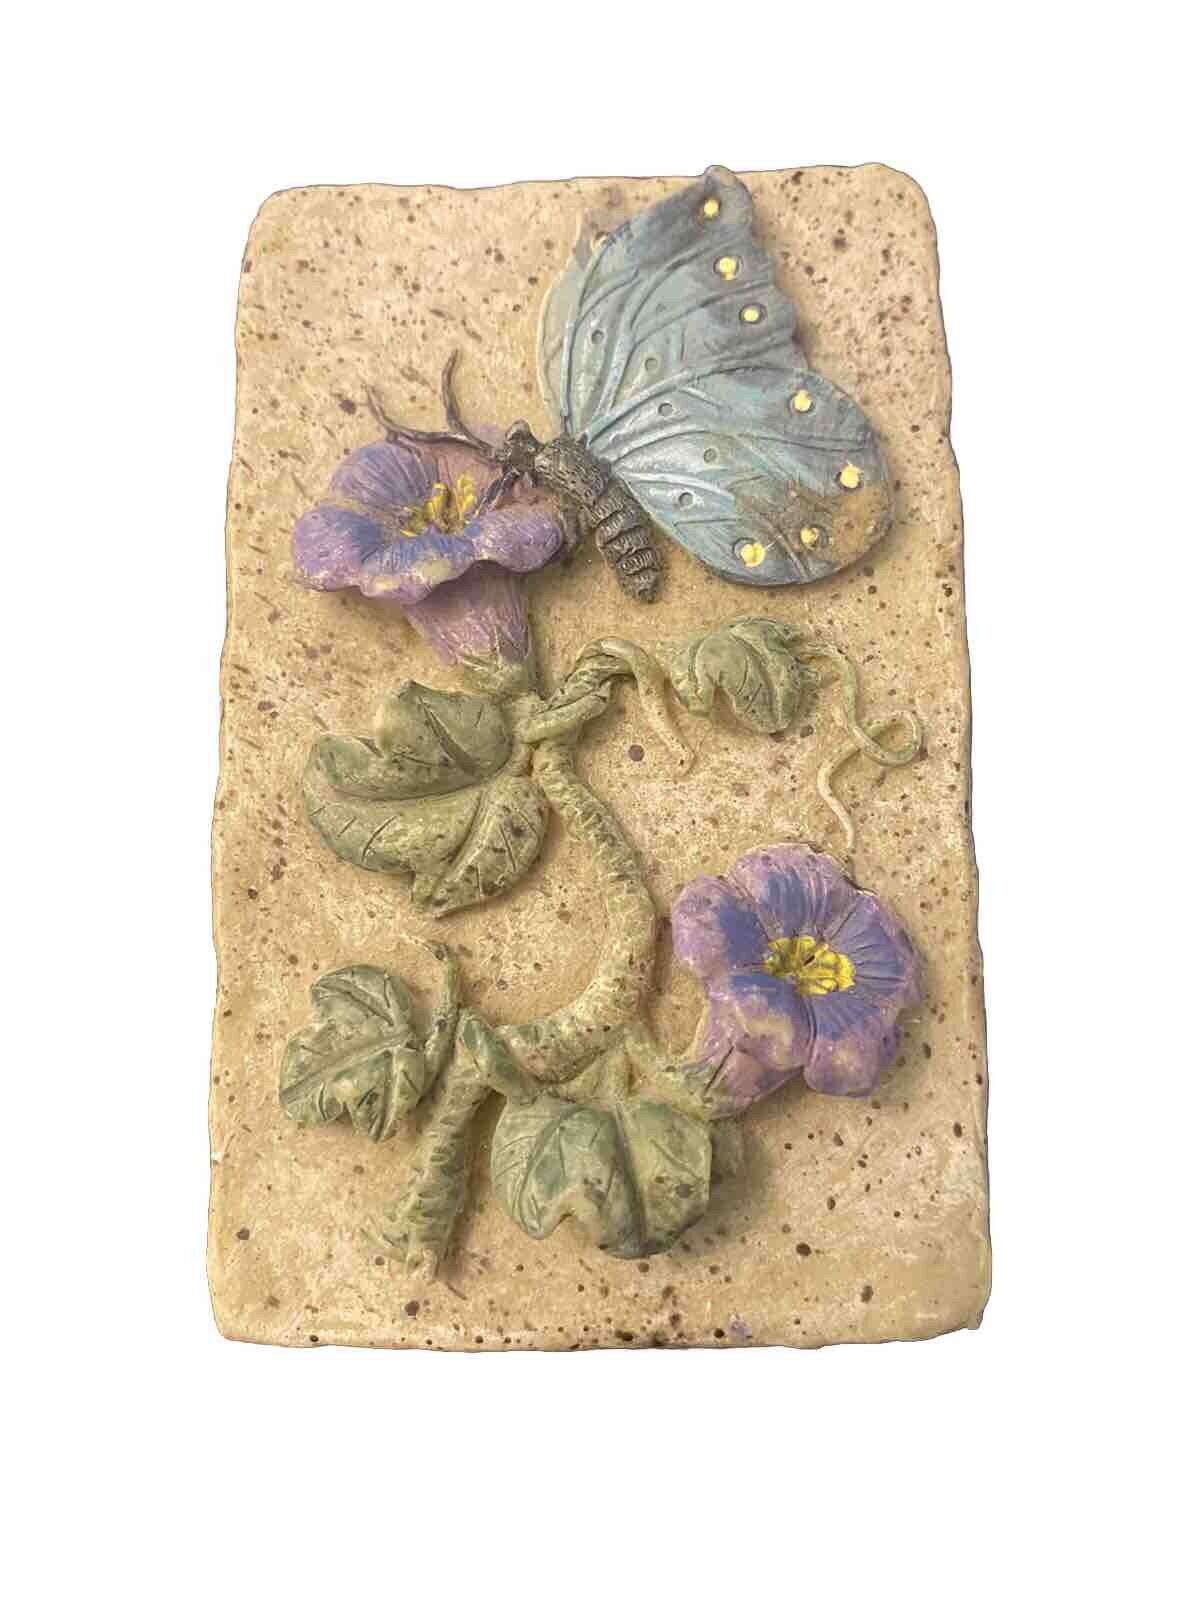 BUTTERFLY AND FLOWERS STONE RESIN JEWELRY TRINKET BOX EUC